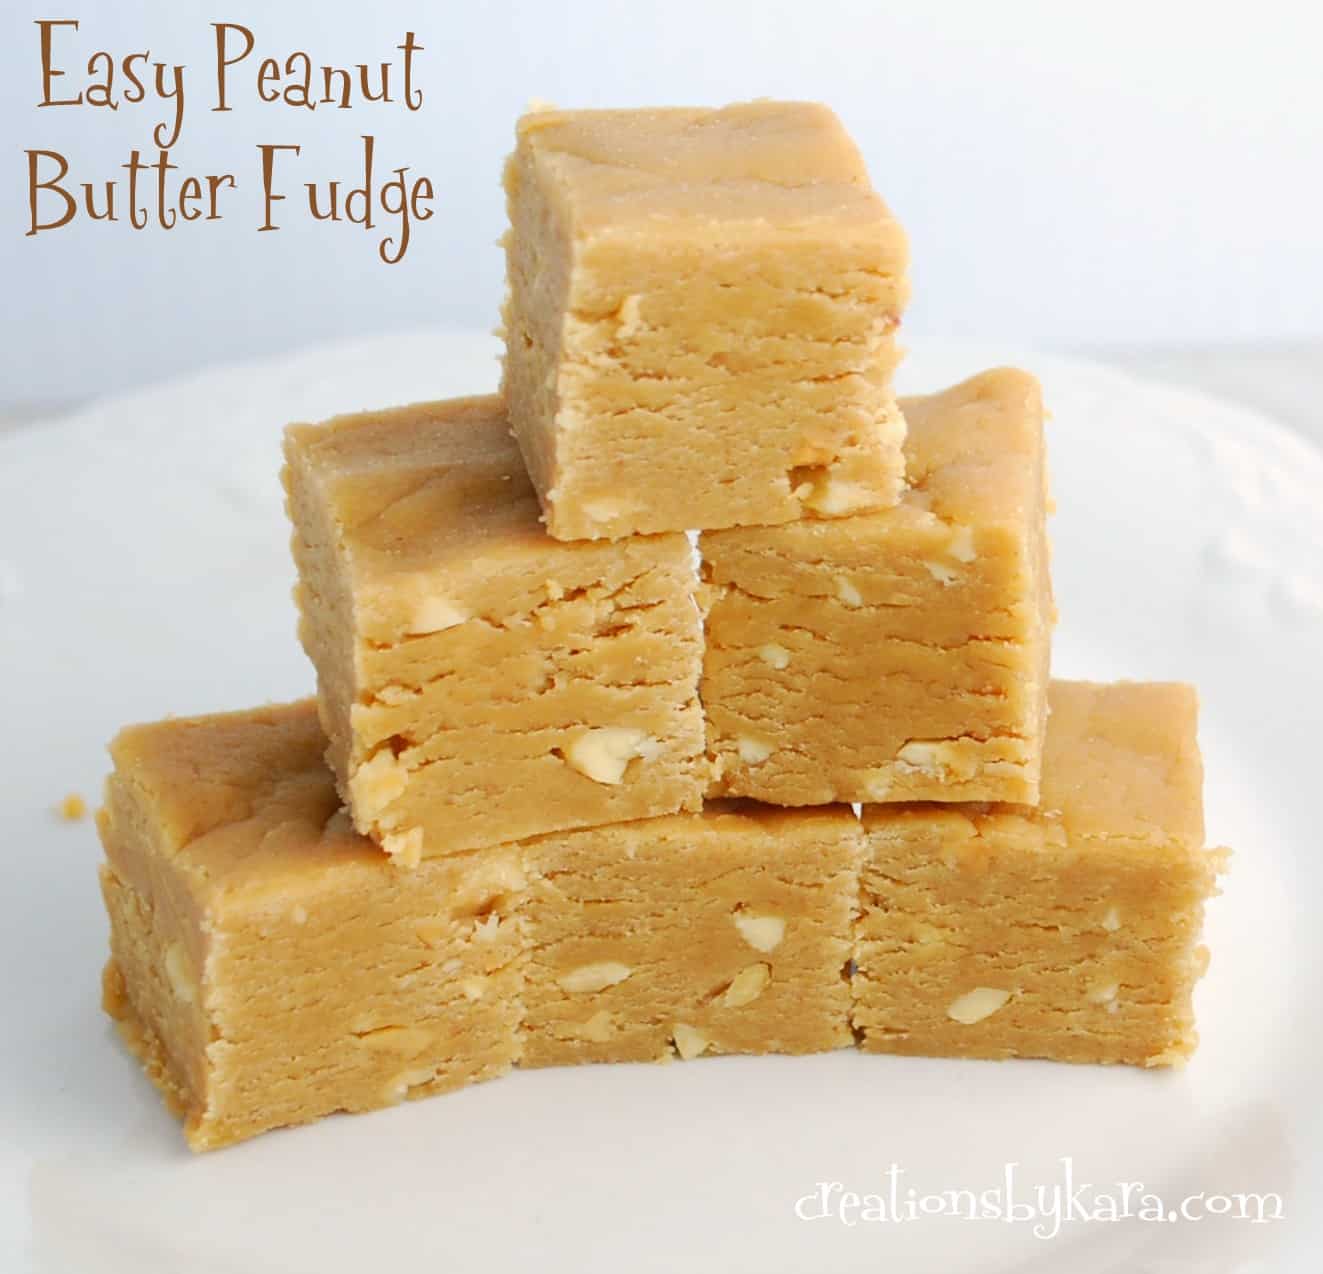 What is an easy recipe for peanut butter fudge?